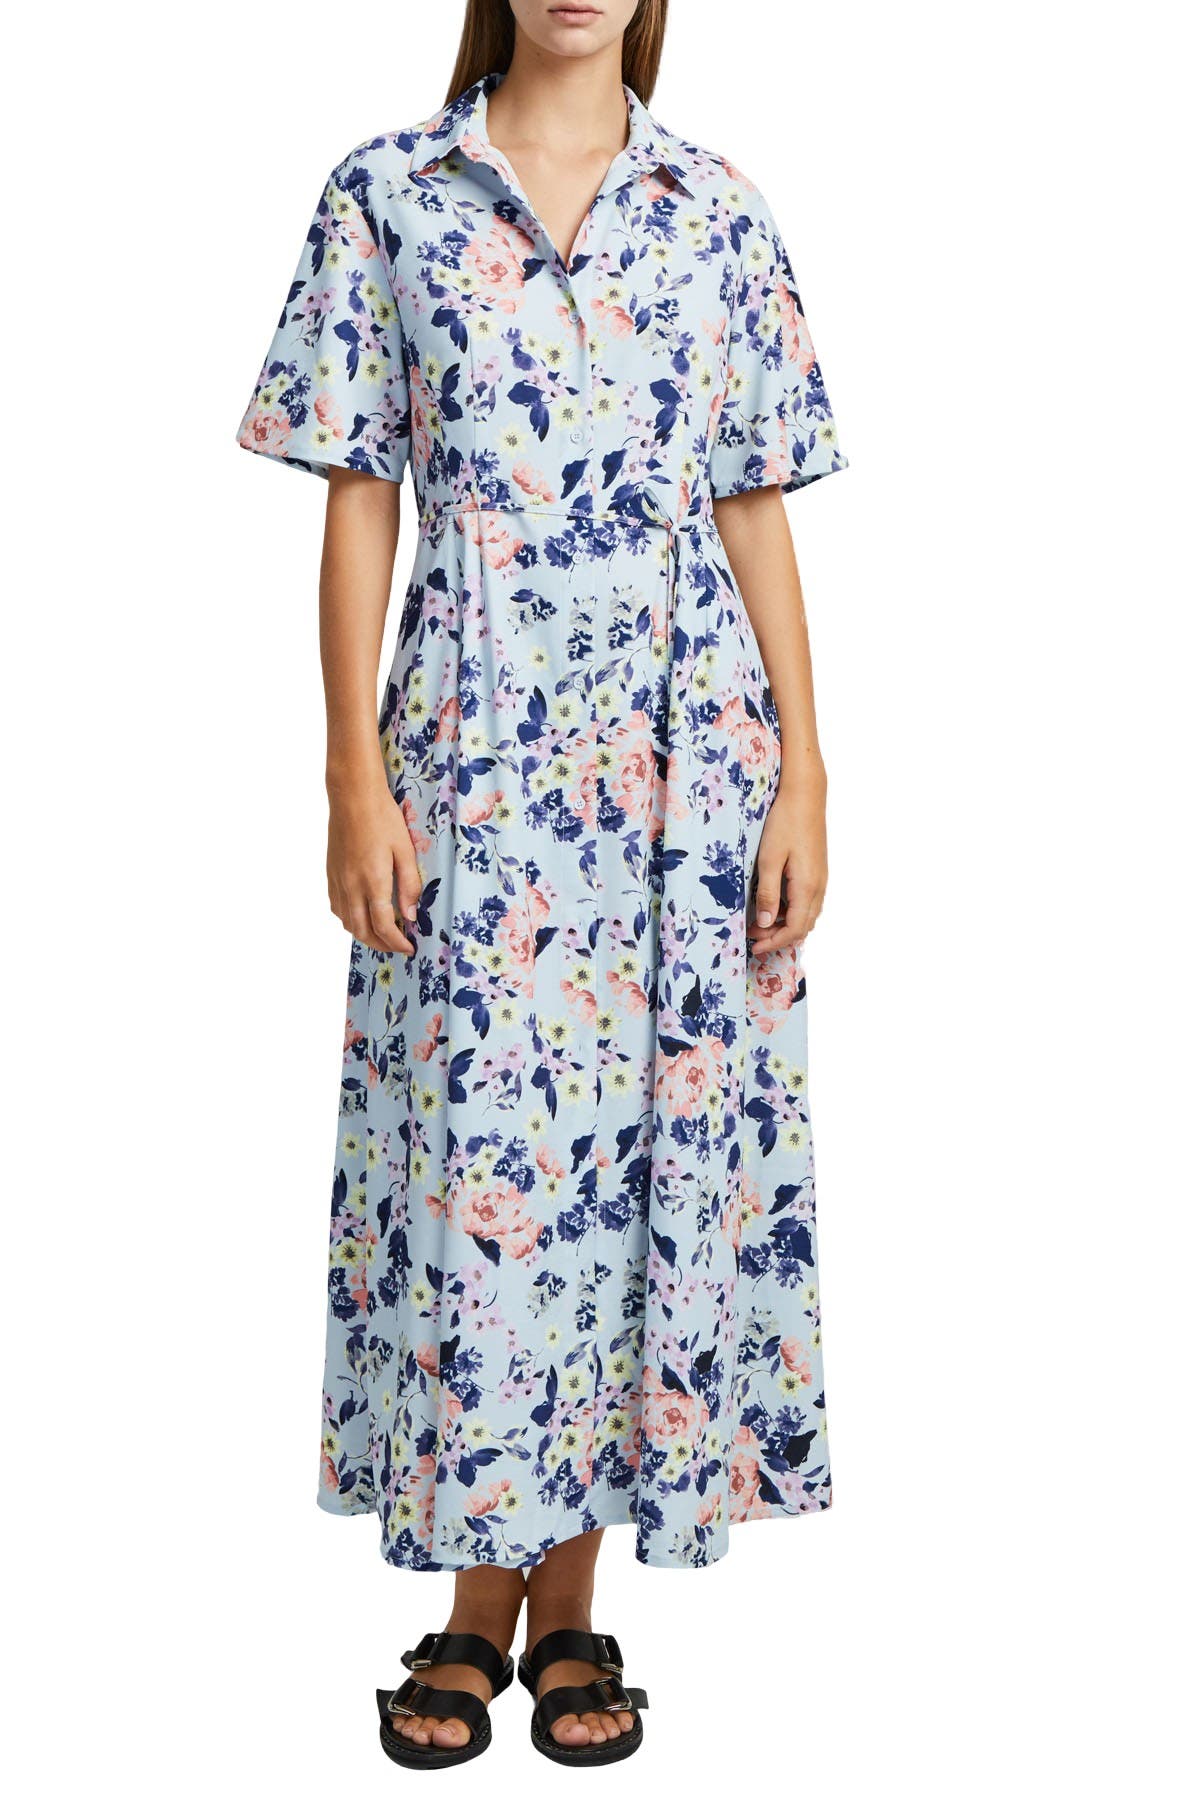 french connection floral shirt dress